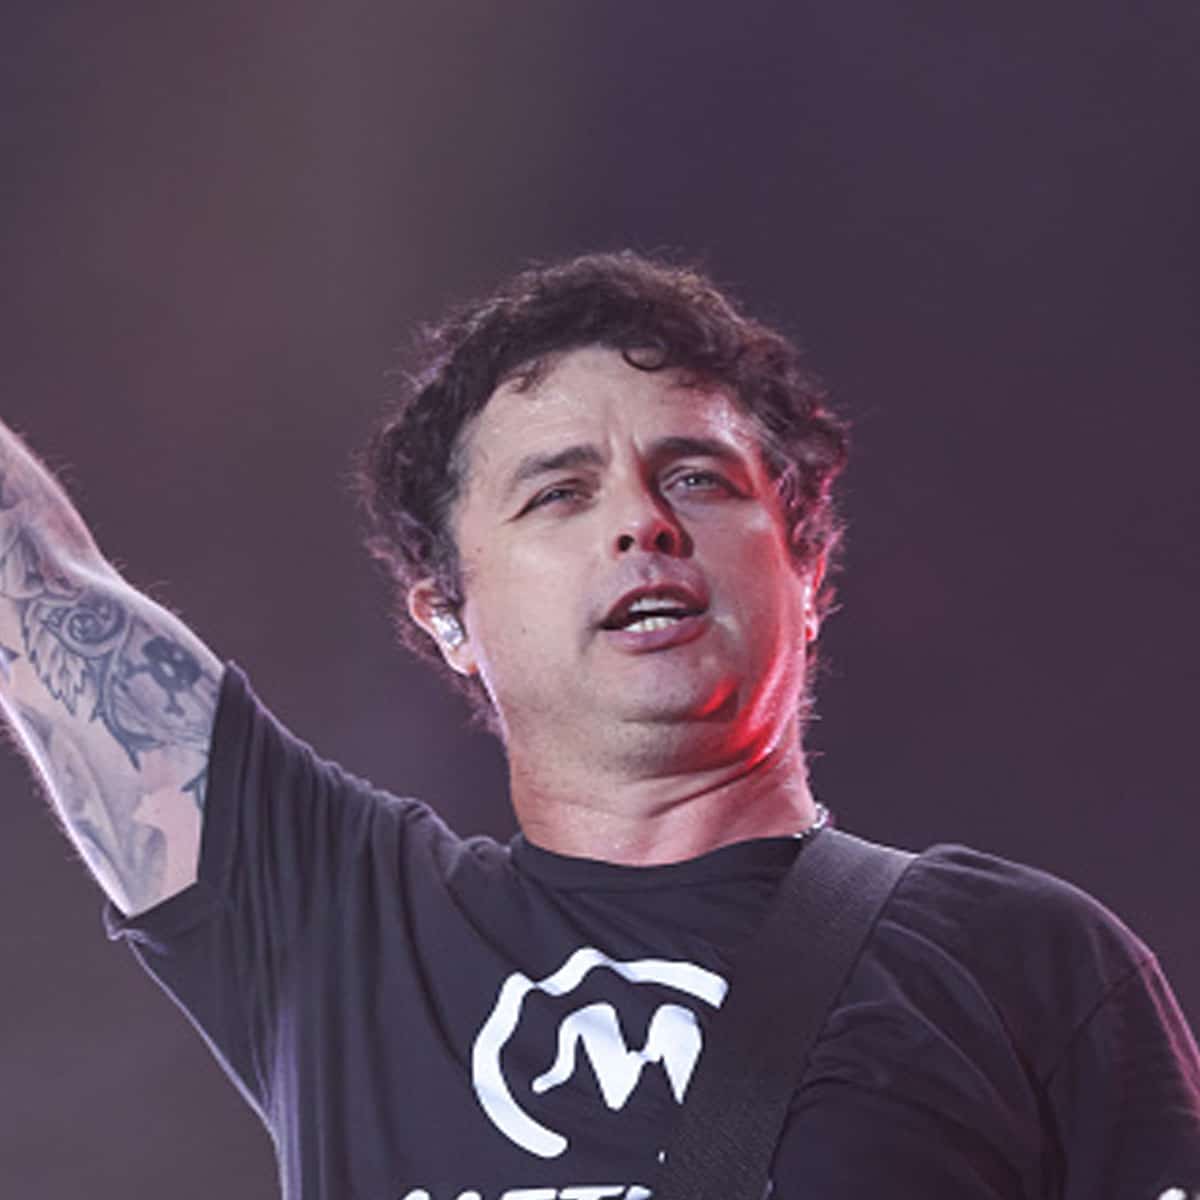 Billie Joe Armstrong of Green Day performs during day 4 of the Lollapalooza Festival at Grant Park